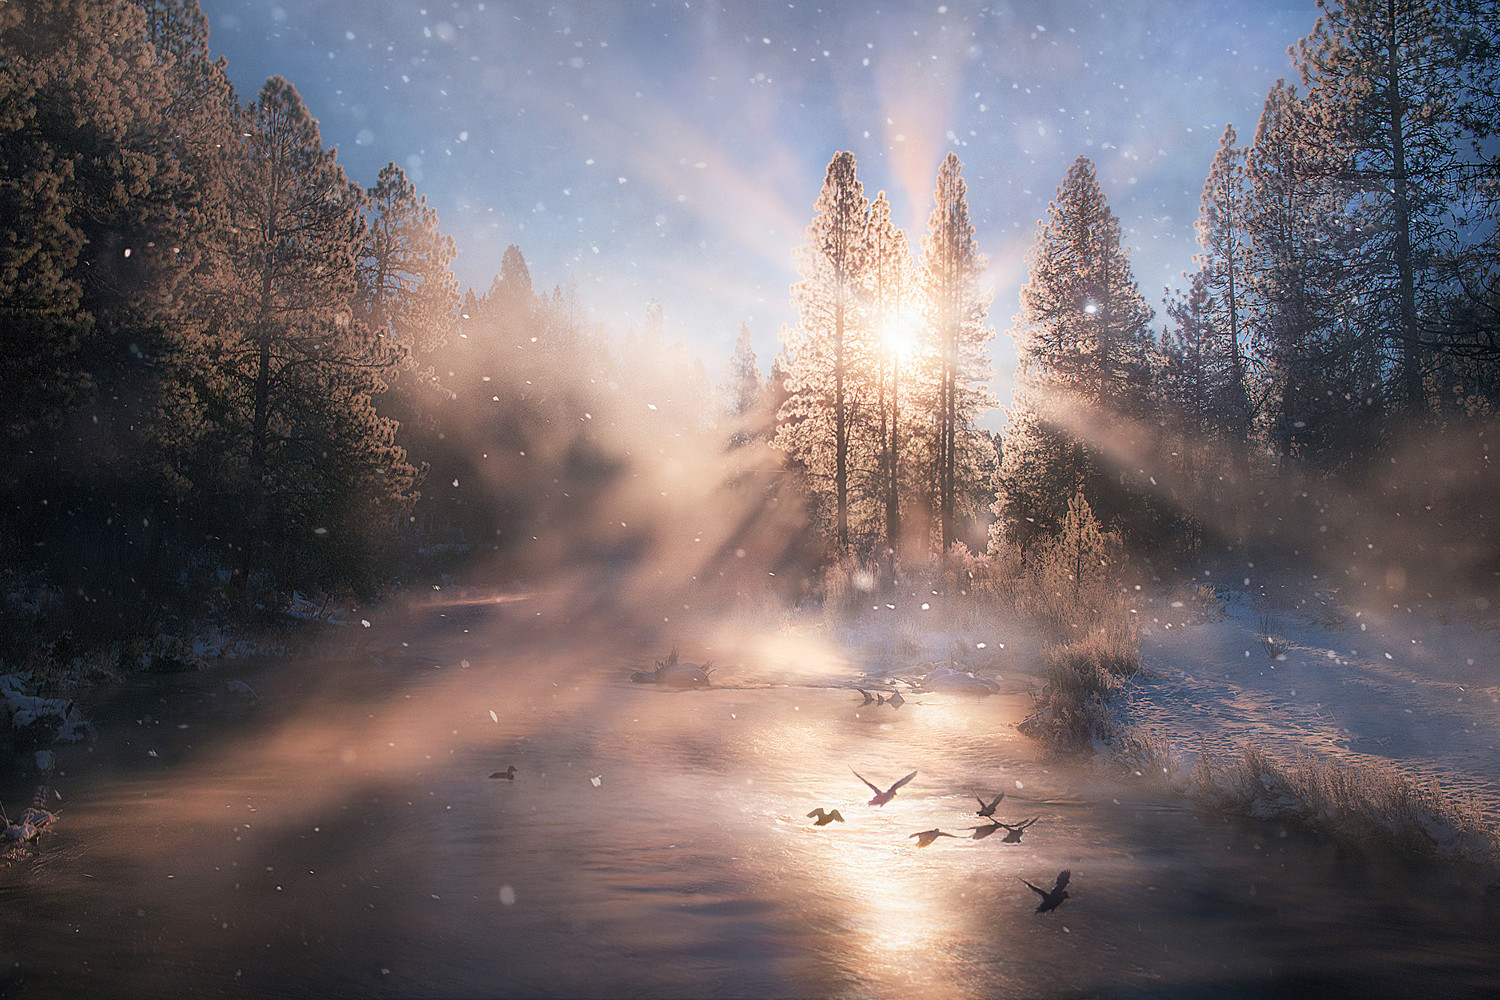 Top 20 Landscape Photos on 500px So Far This Year